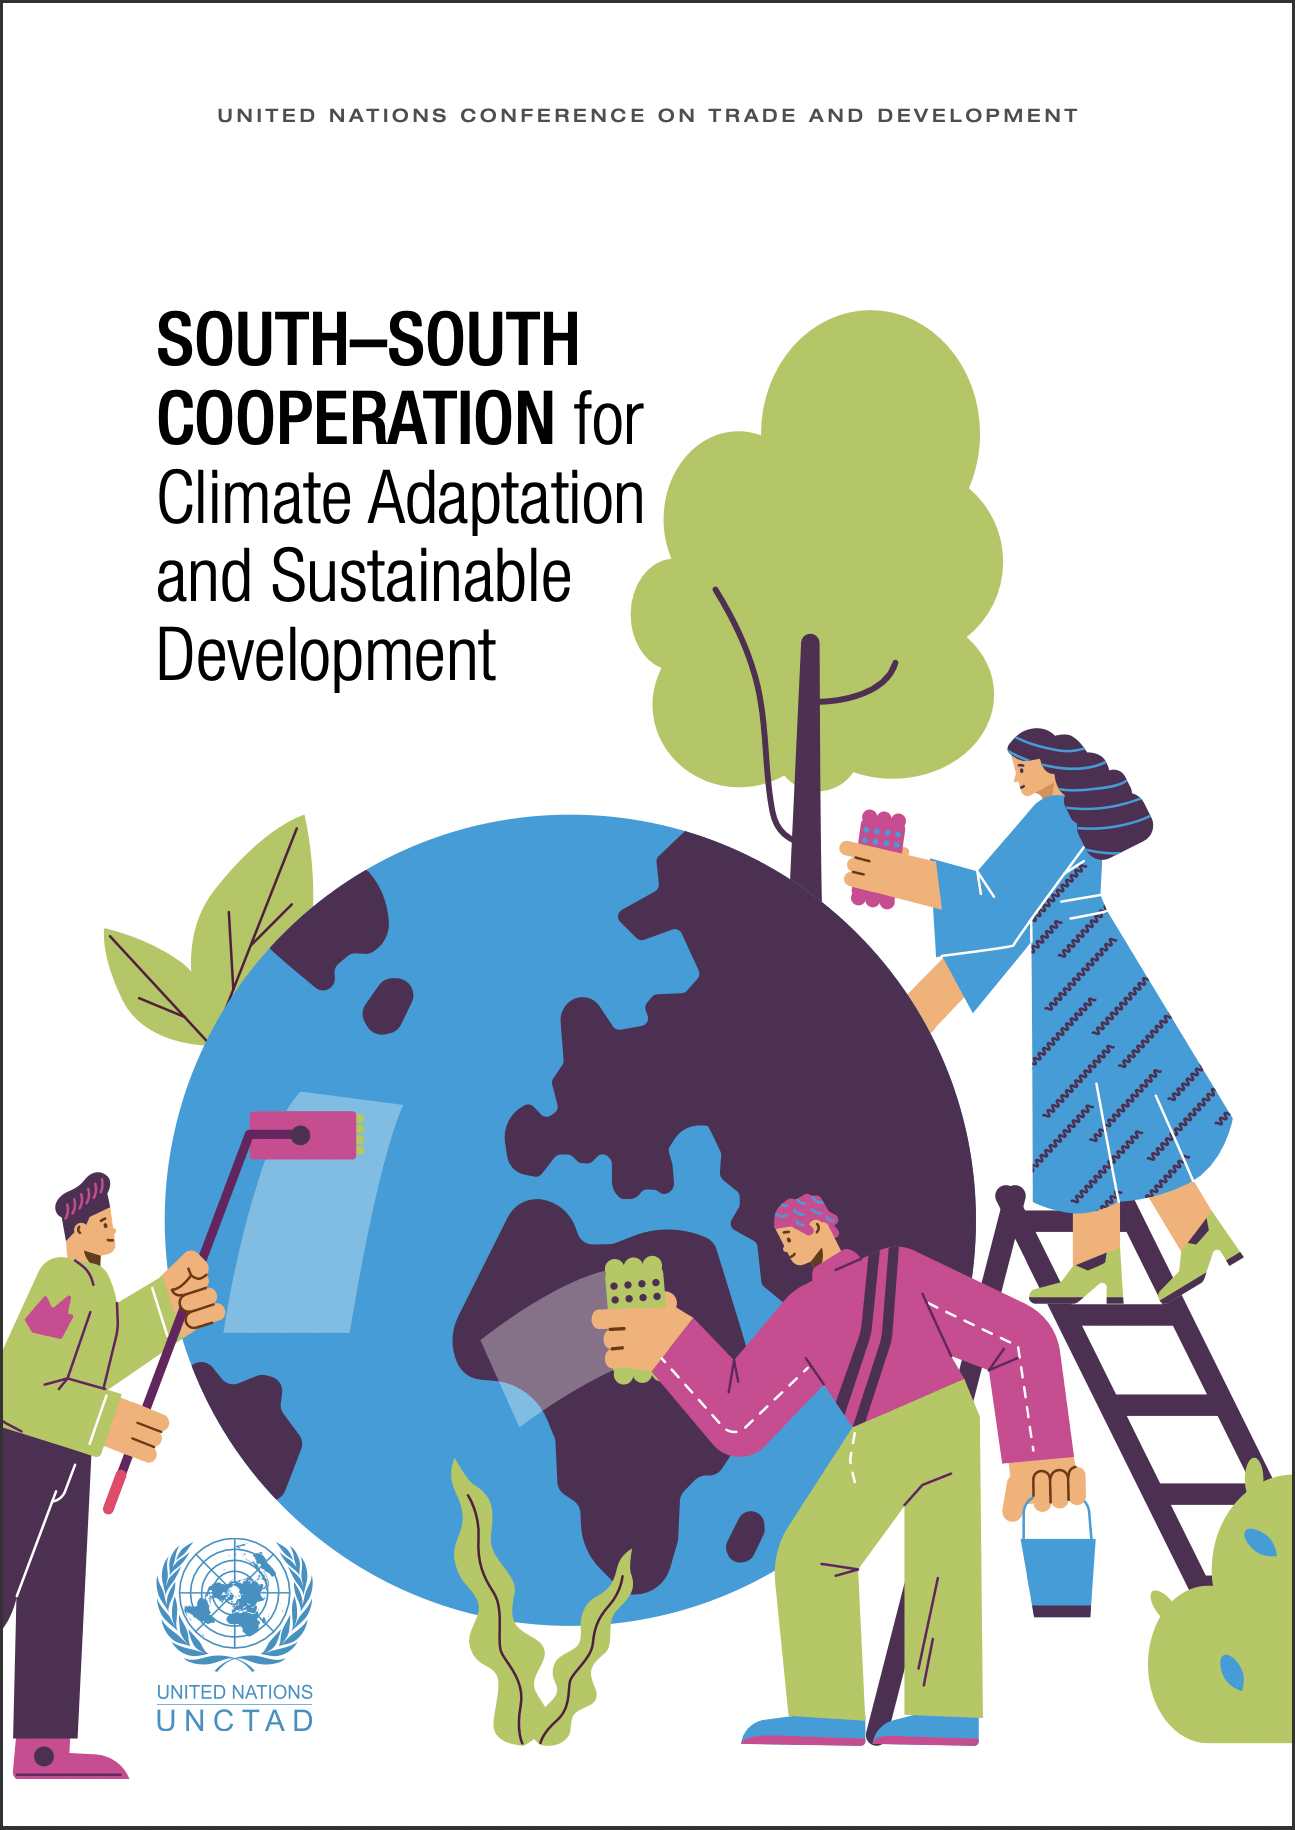 South-South Cooperation for Climate Adaptation and Sustainable